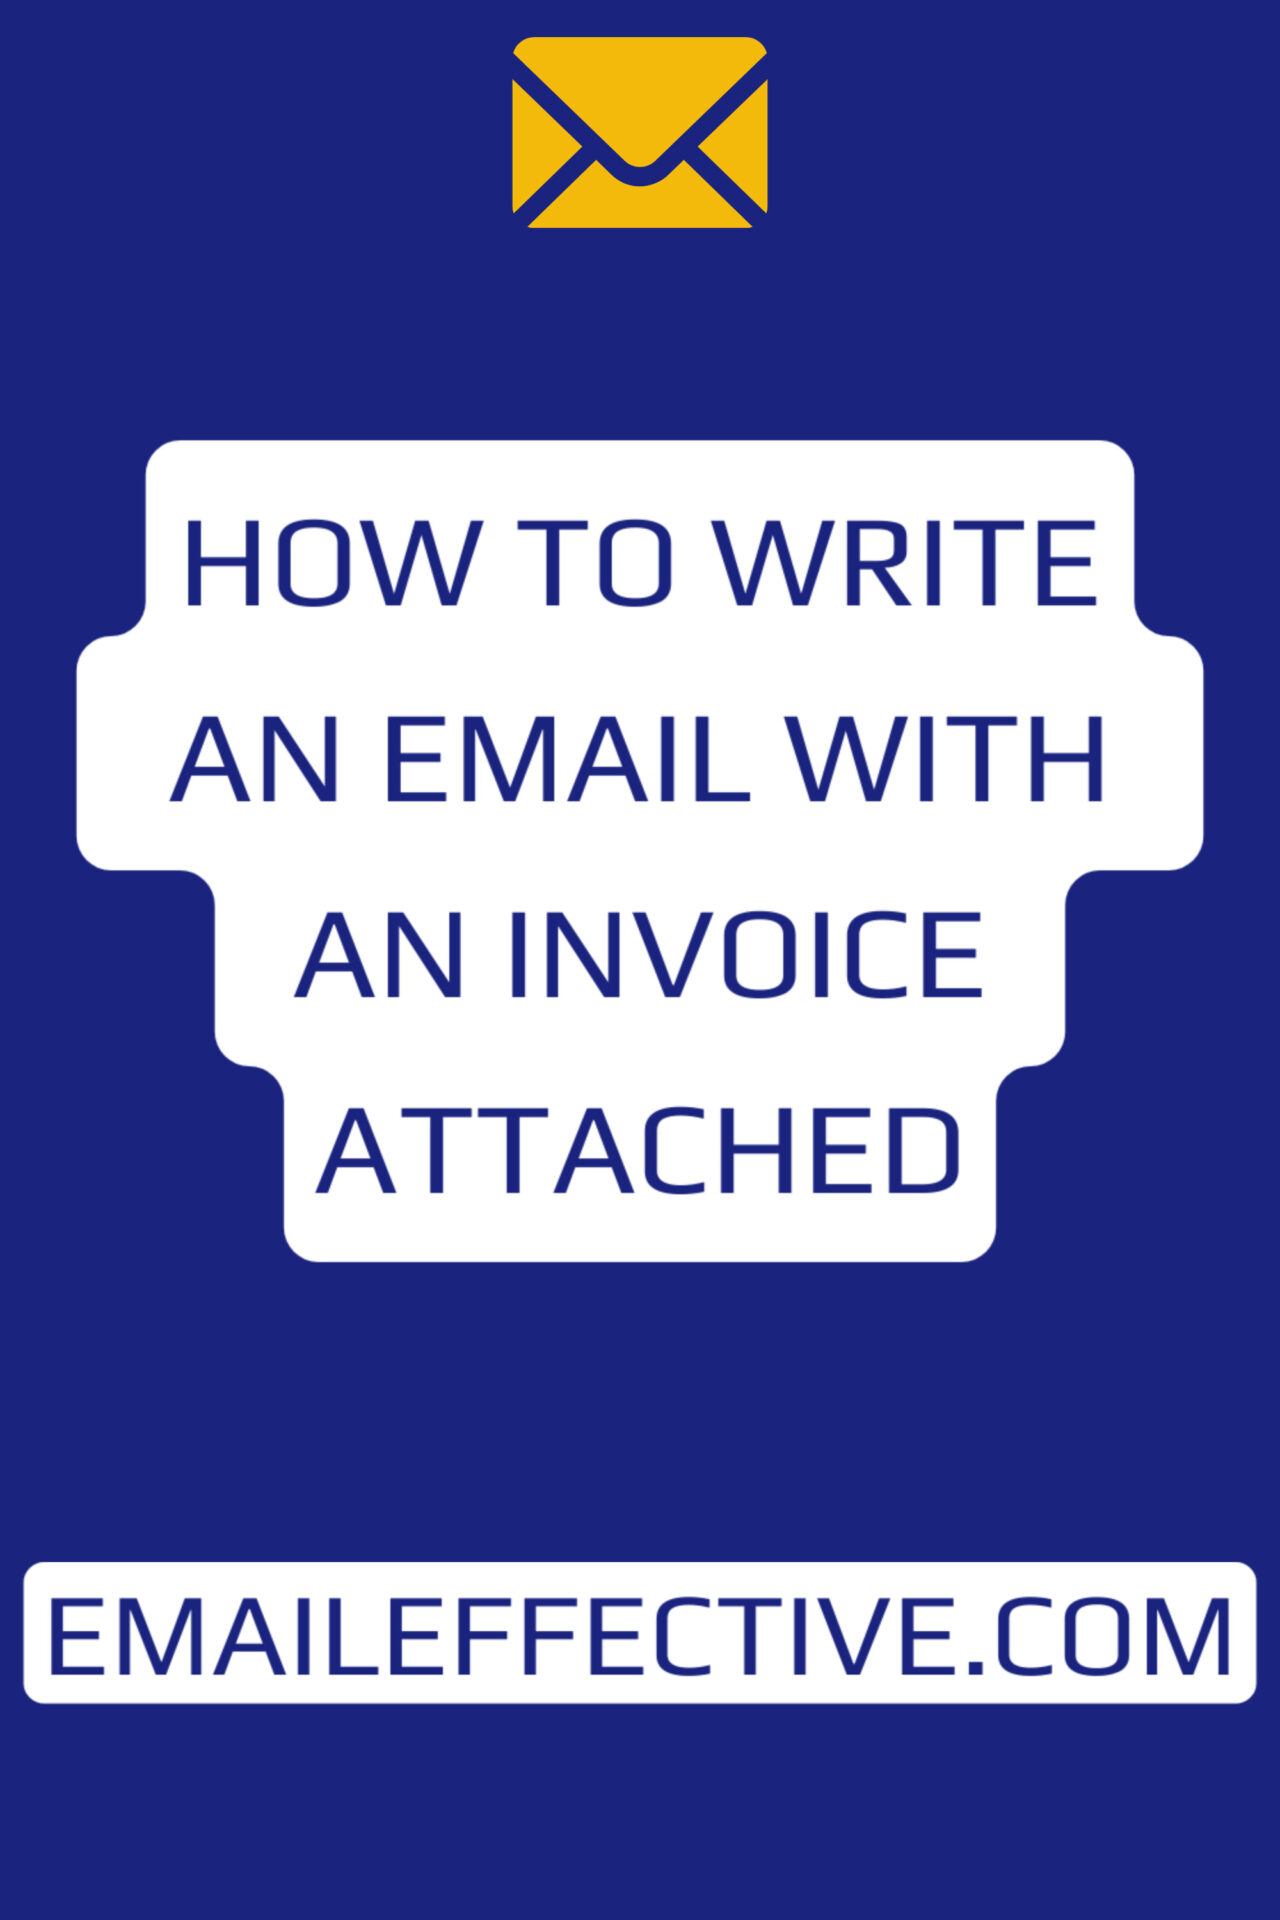 How to Write an Email with an Invoice Attached